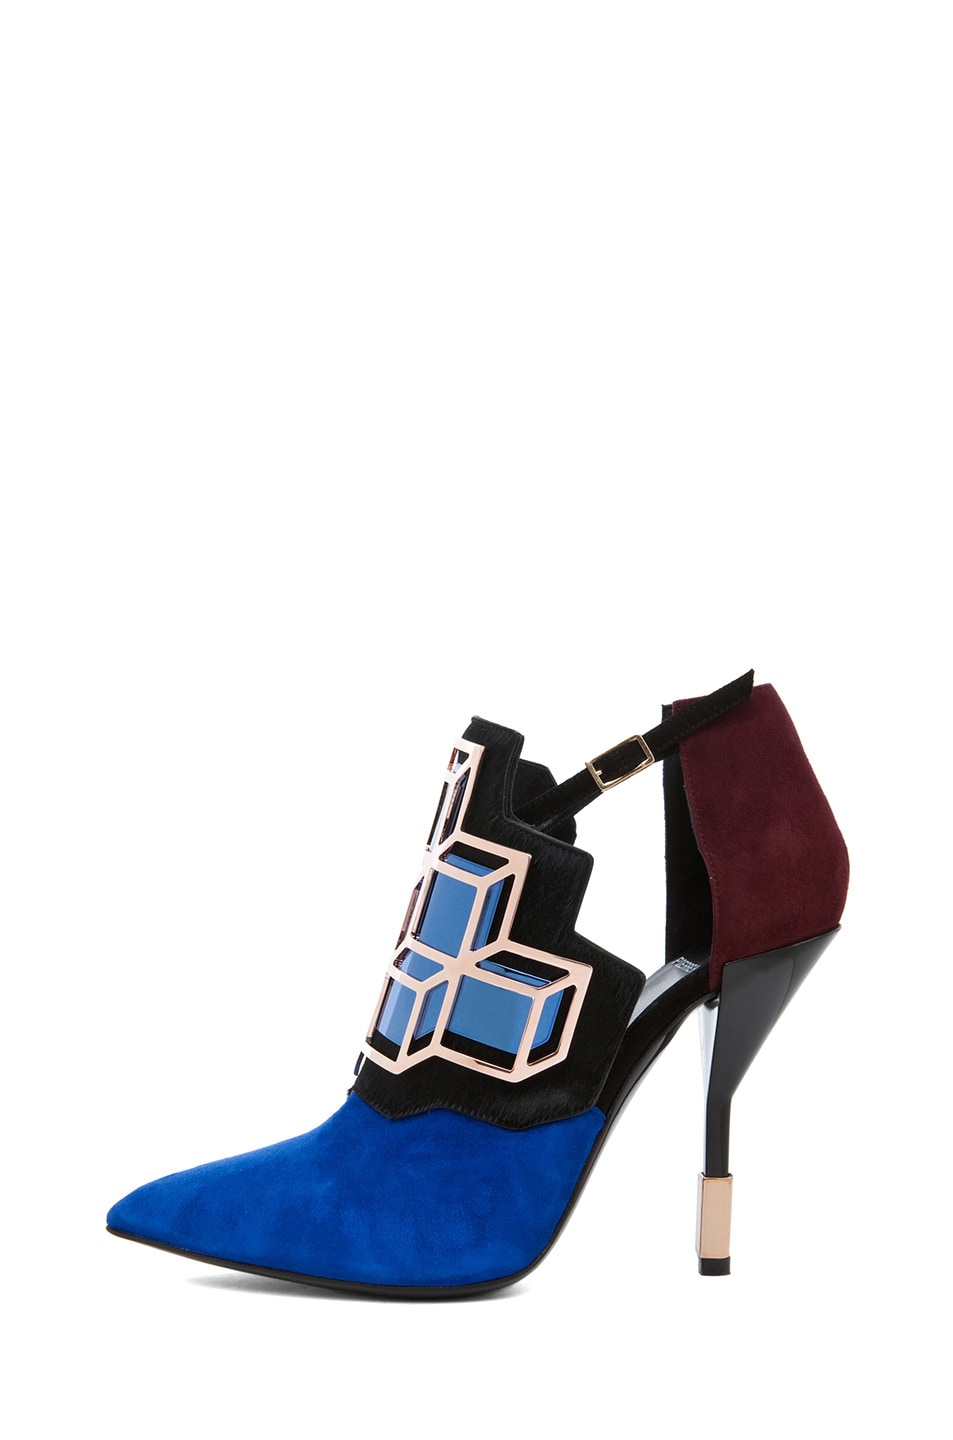 Pierre Hardy Suede Cube Bootie in Trico | FWRD